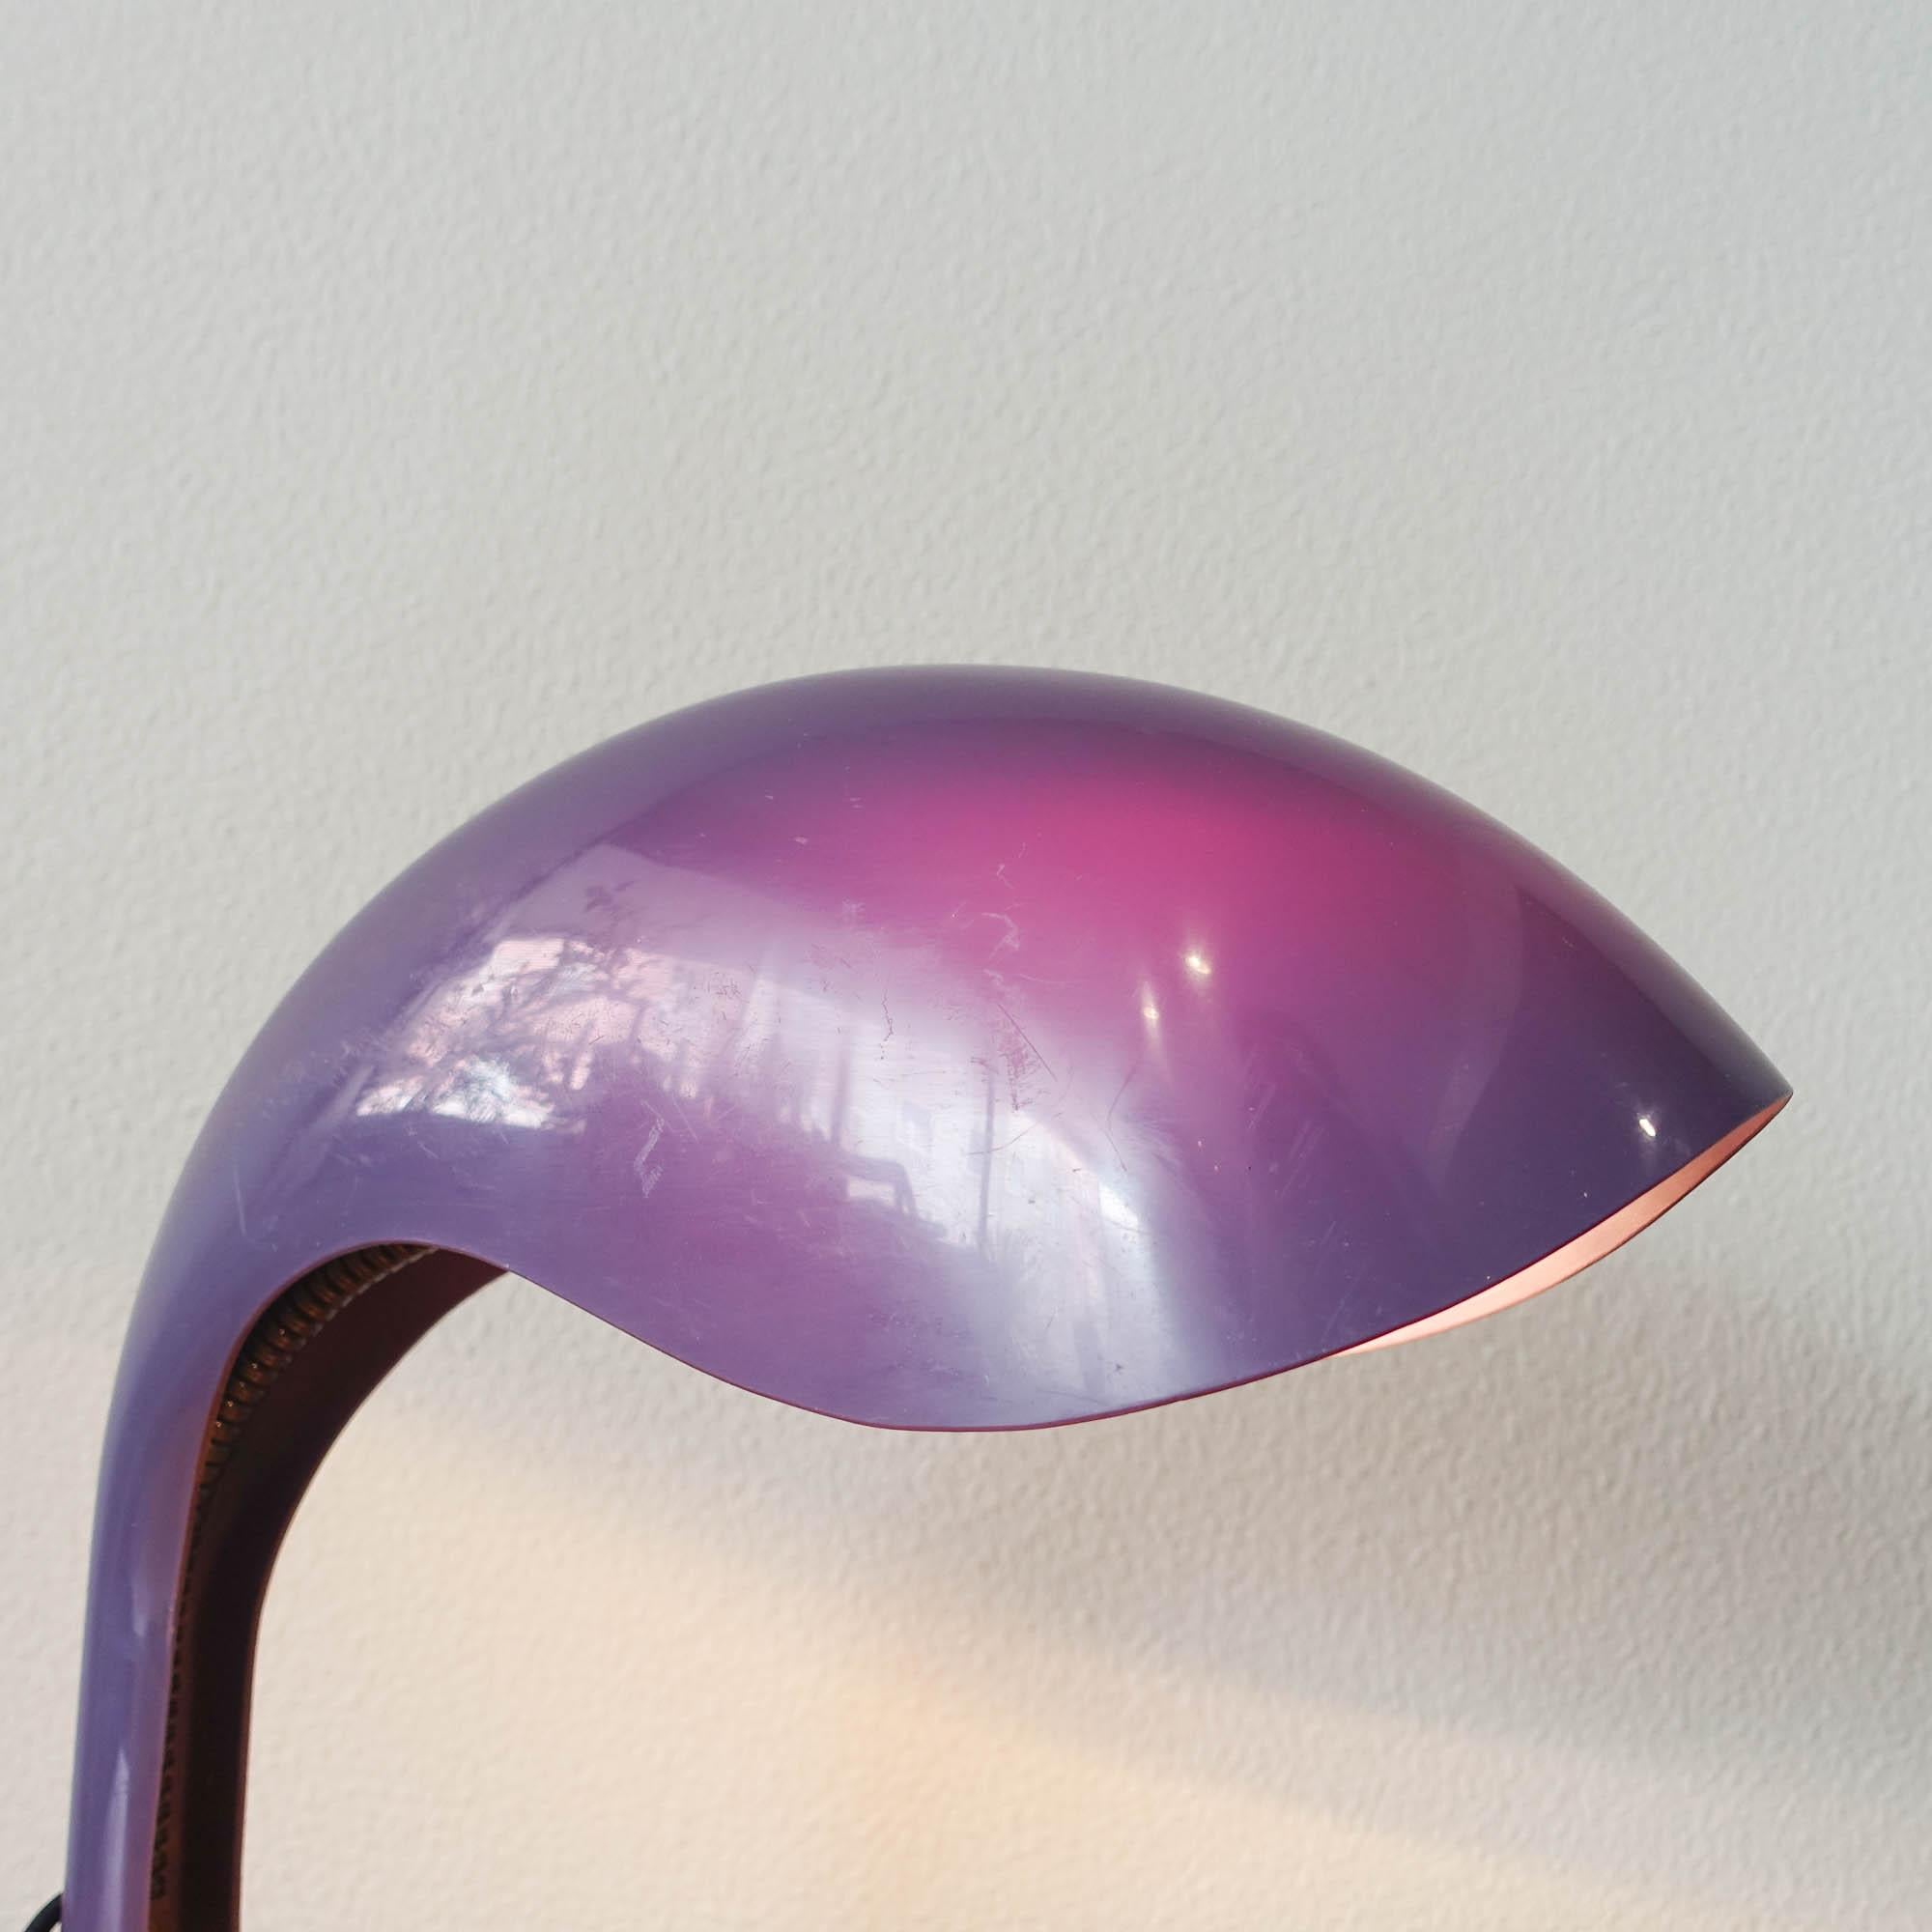 Italian Plastic and Metal Rhea Table Lamp by Marcello Cuneo for Ampaglas, 1960s For Sale 7